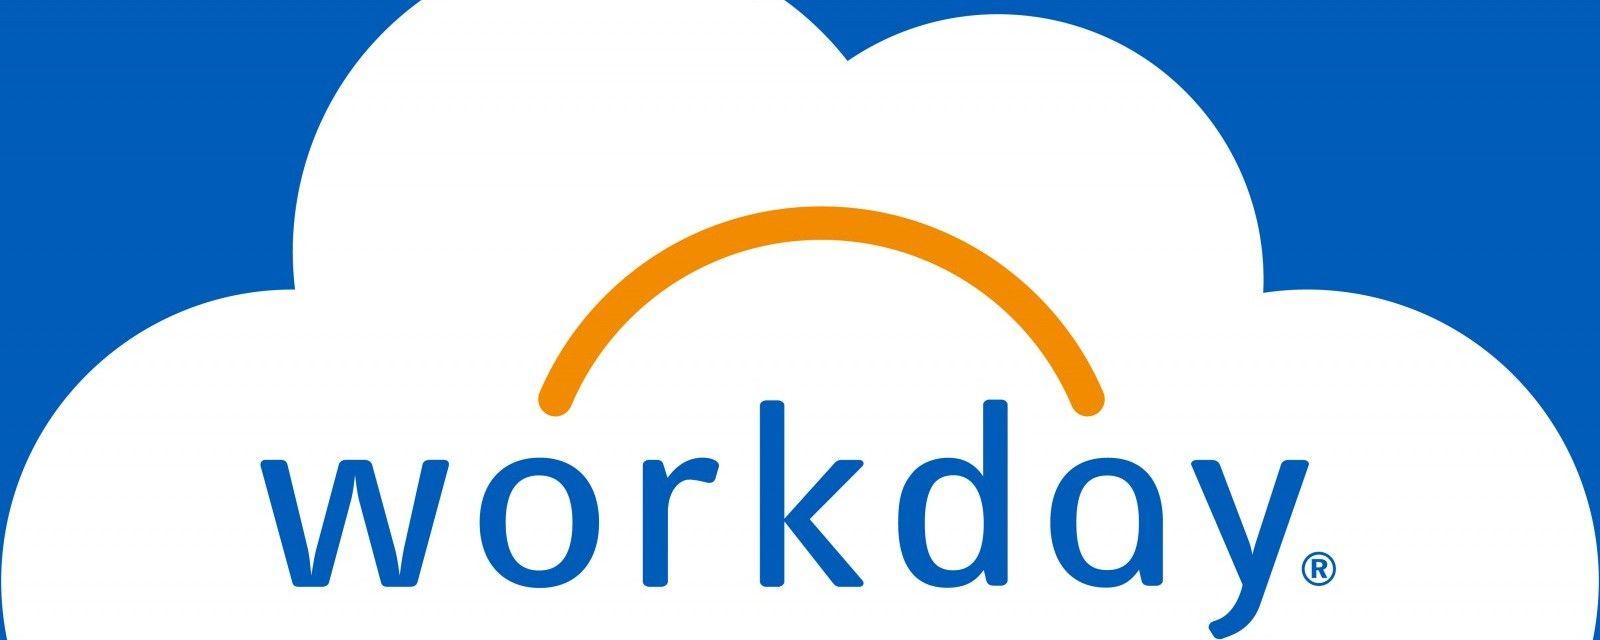 Workday Logo - Dell Boomi Debuts Faster, More Reliable Workday Employee Onboarding